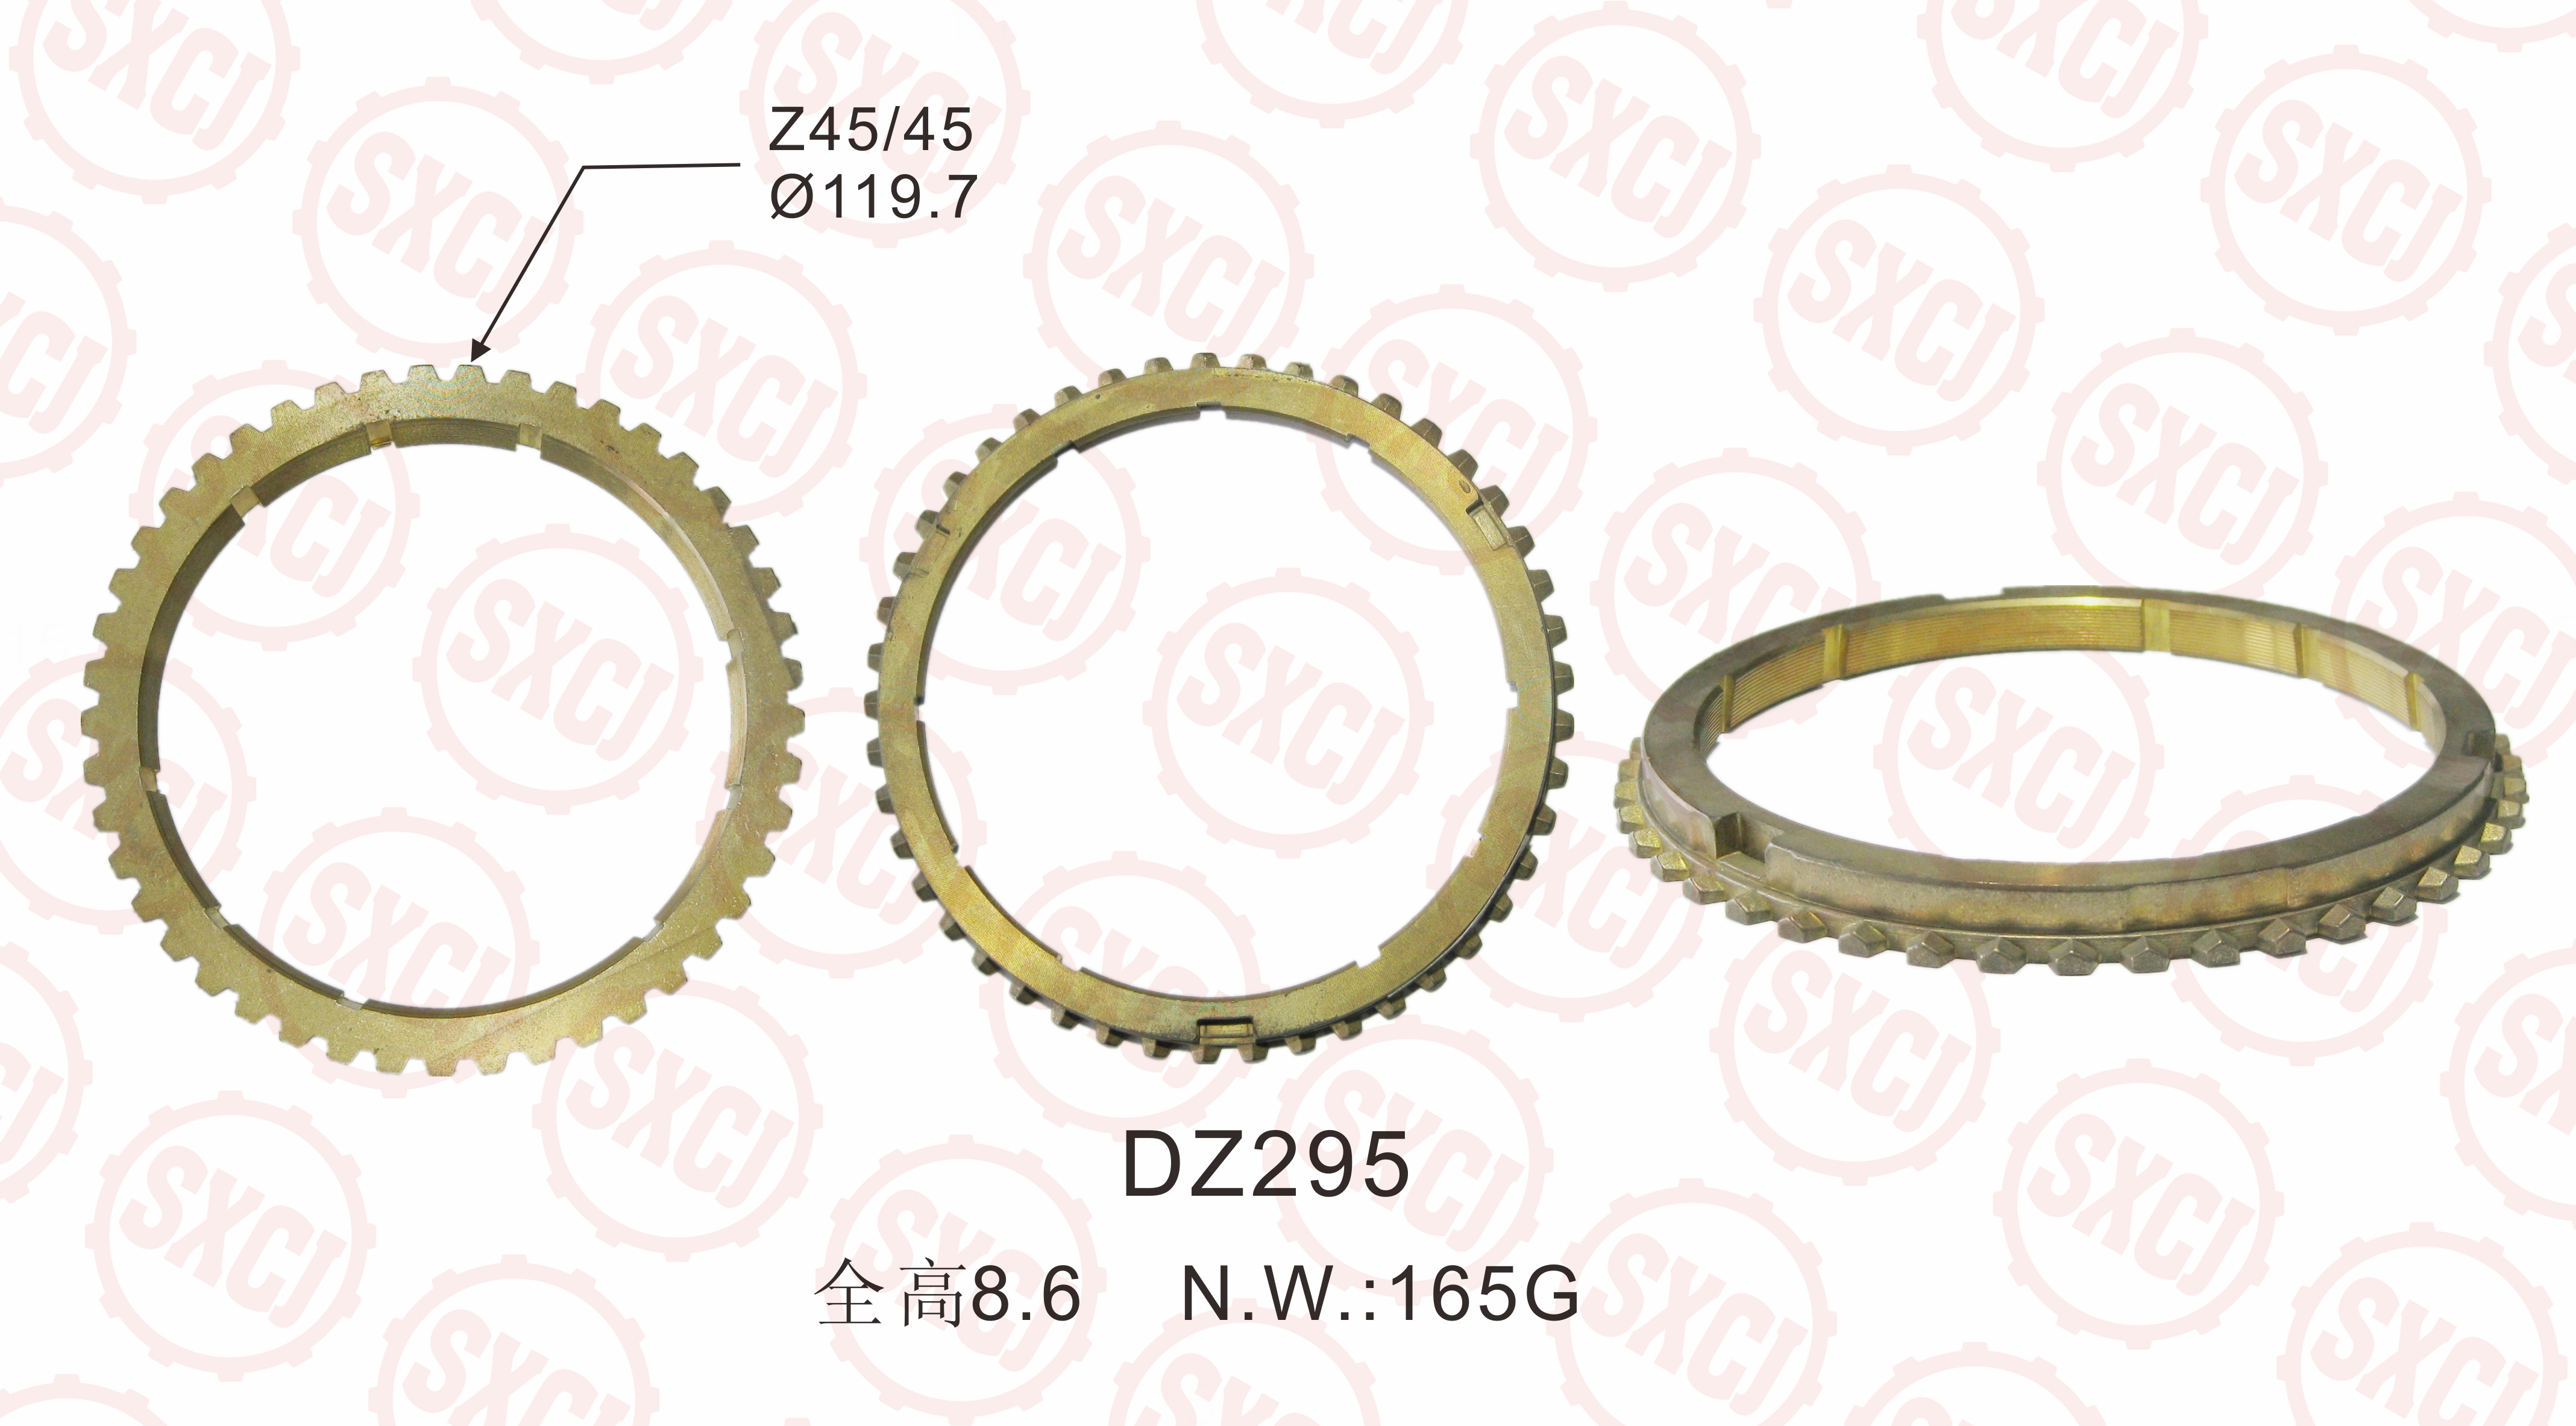 Lowest Price Synchronize Ring